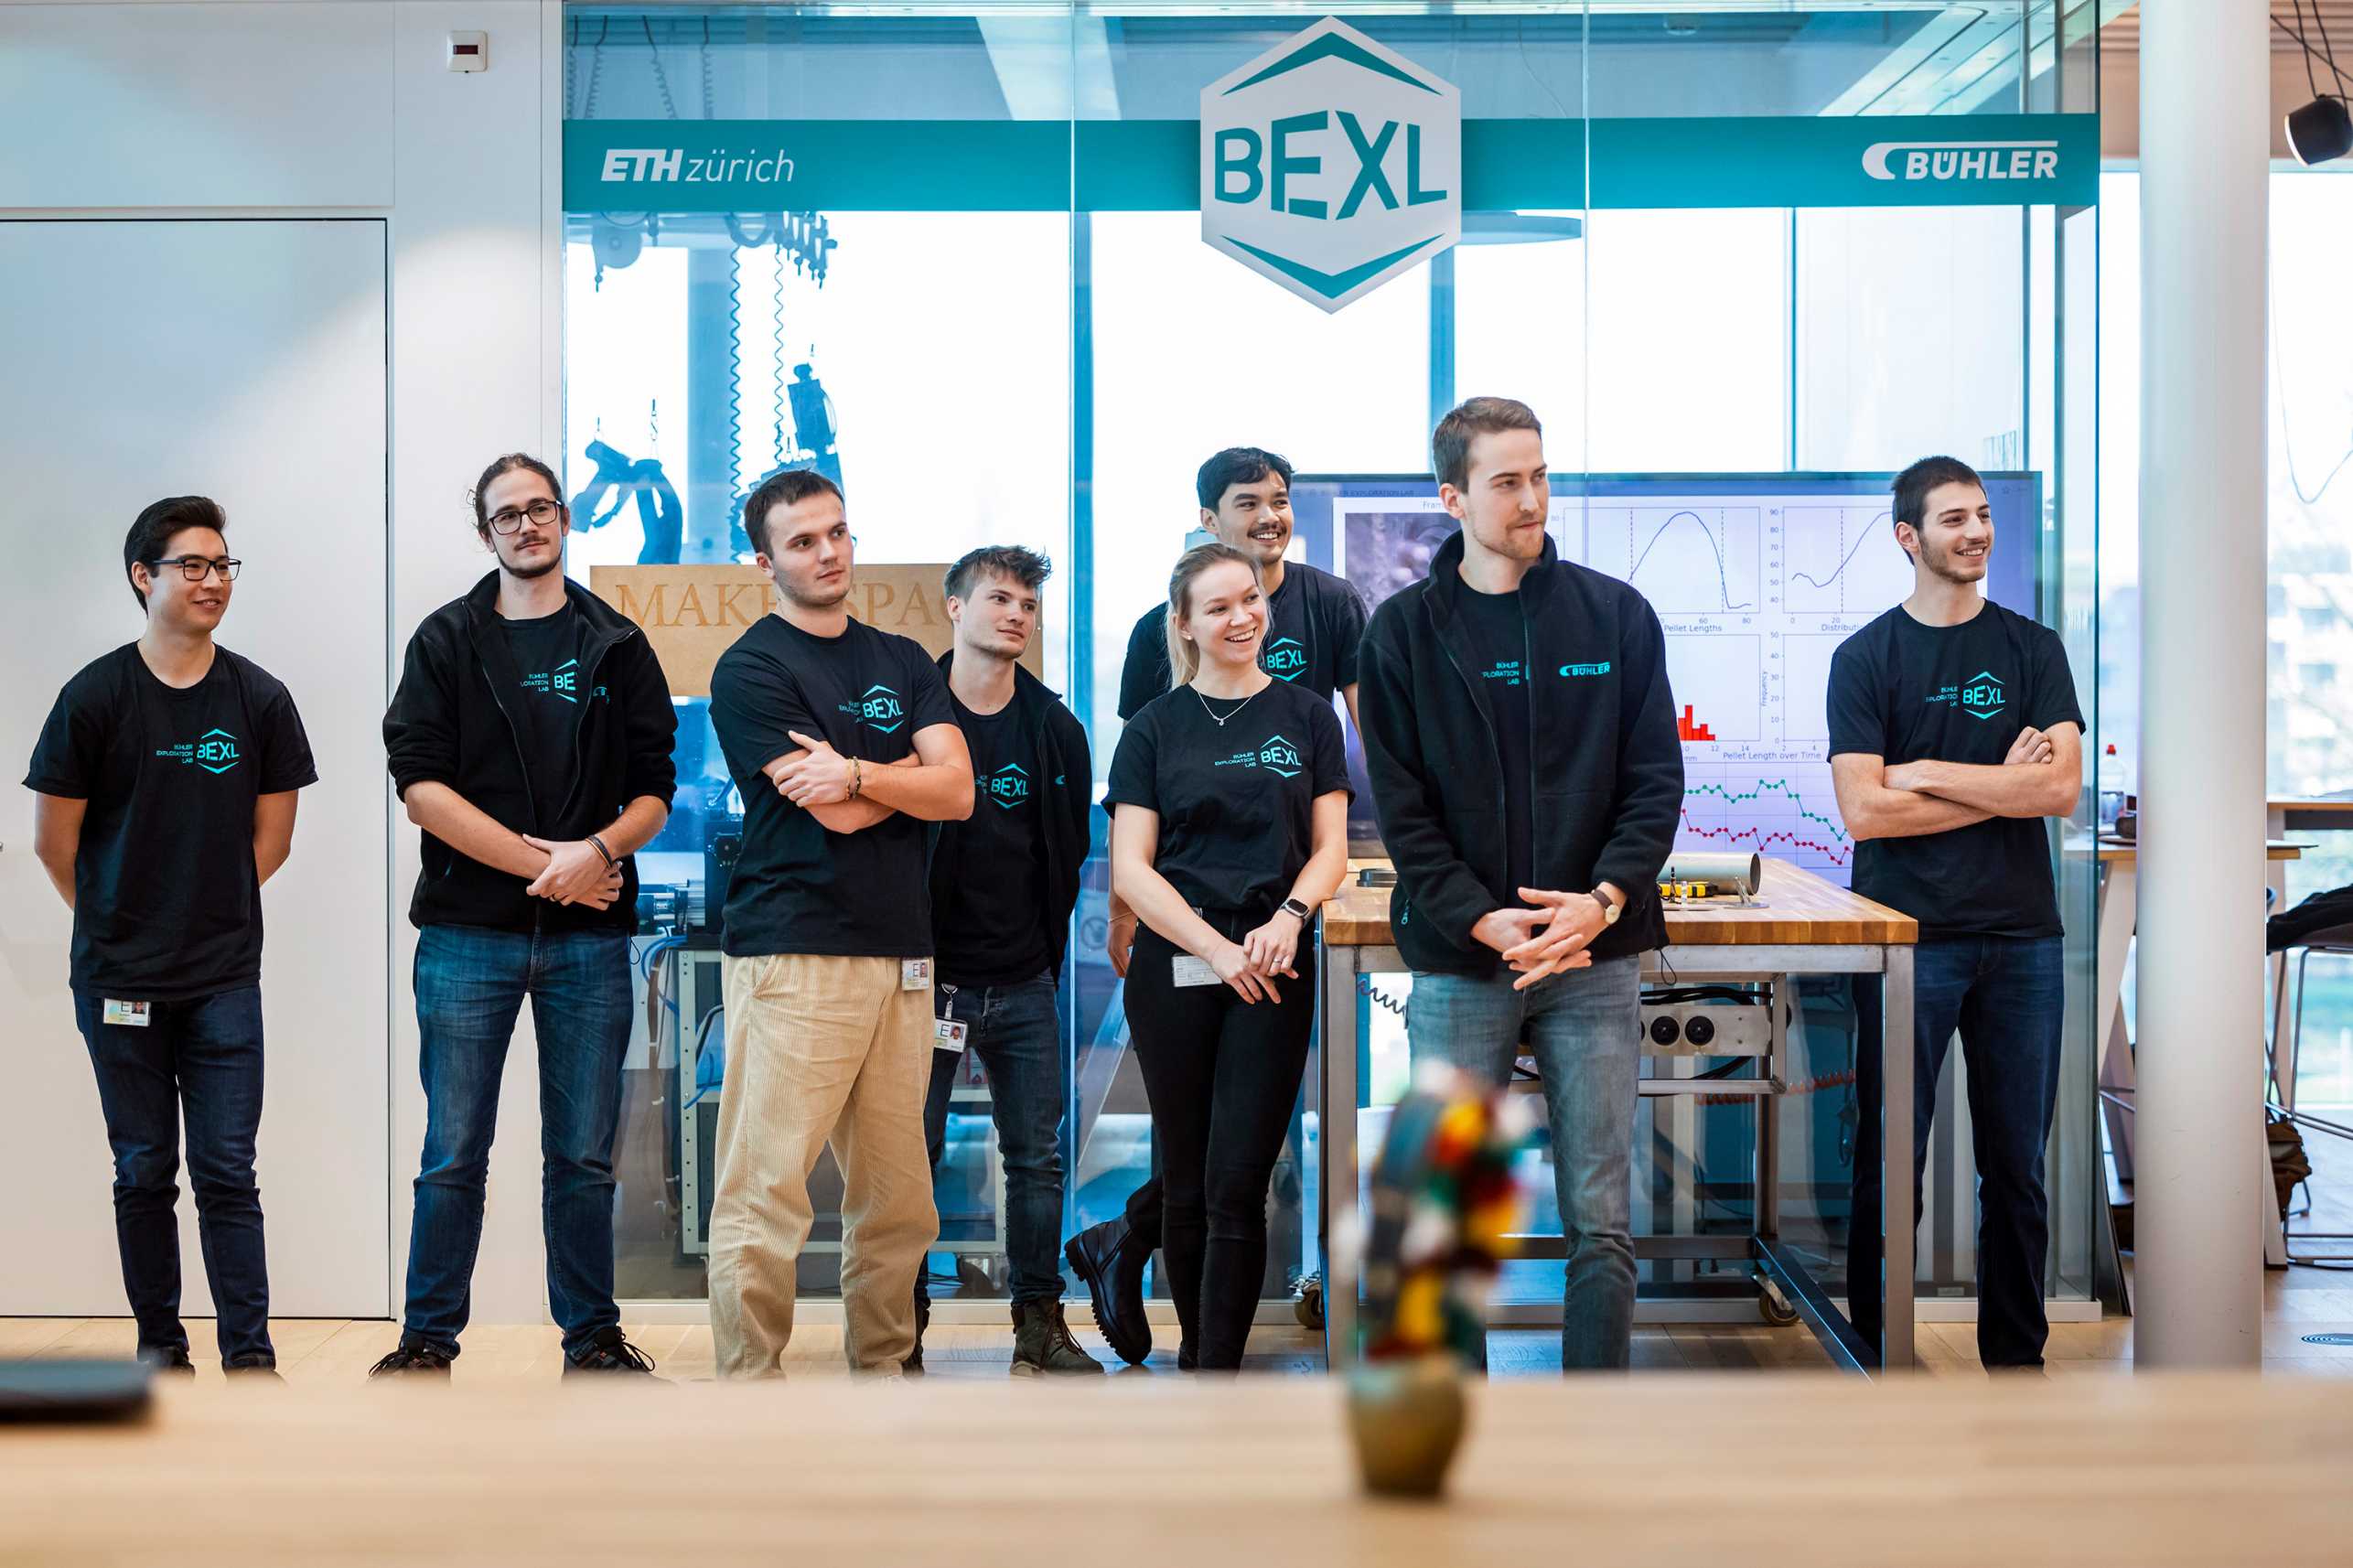 Enlarged view: Group photo of the students of the BEXL team